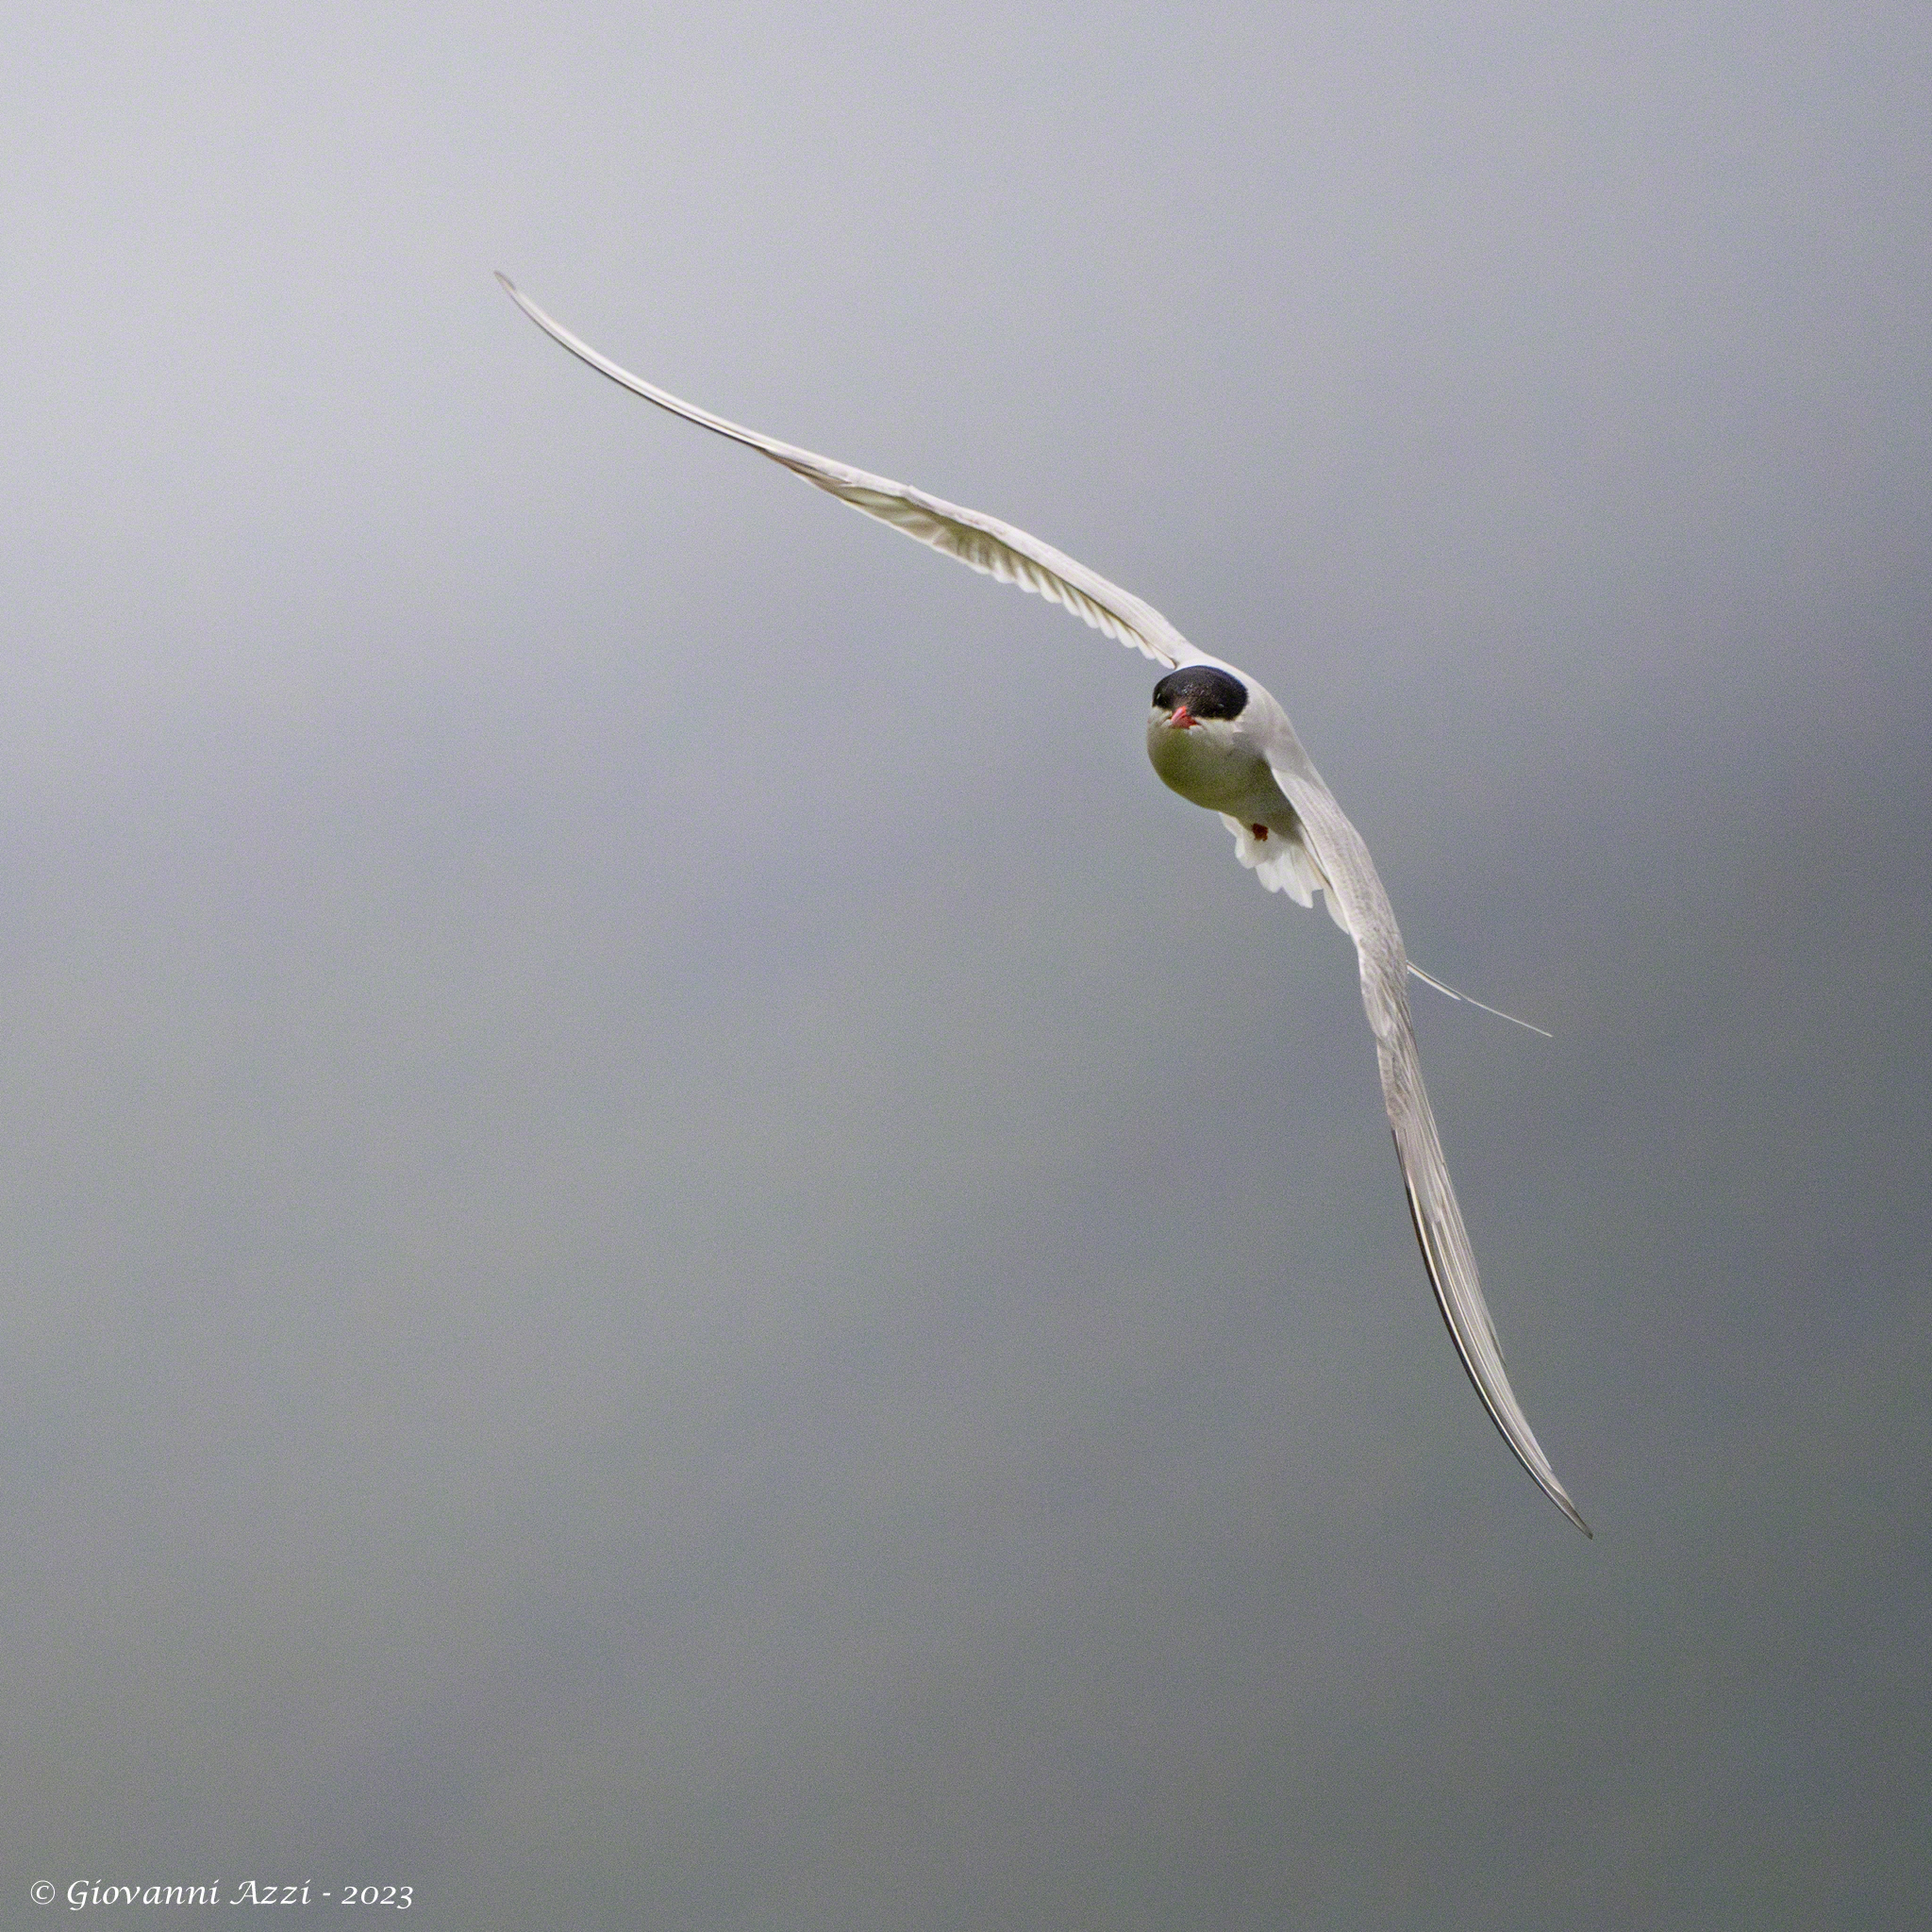 The turn of the Arctic tern...